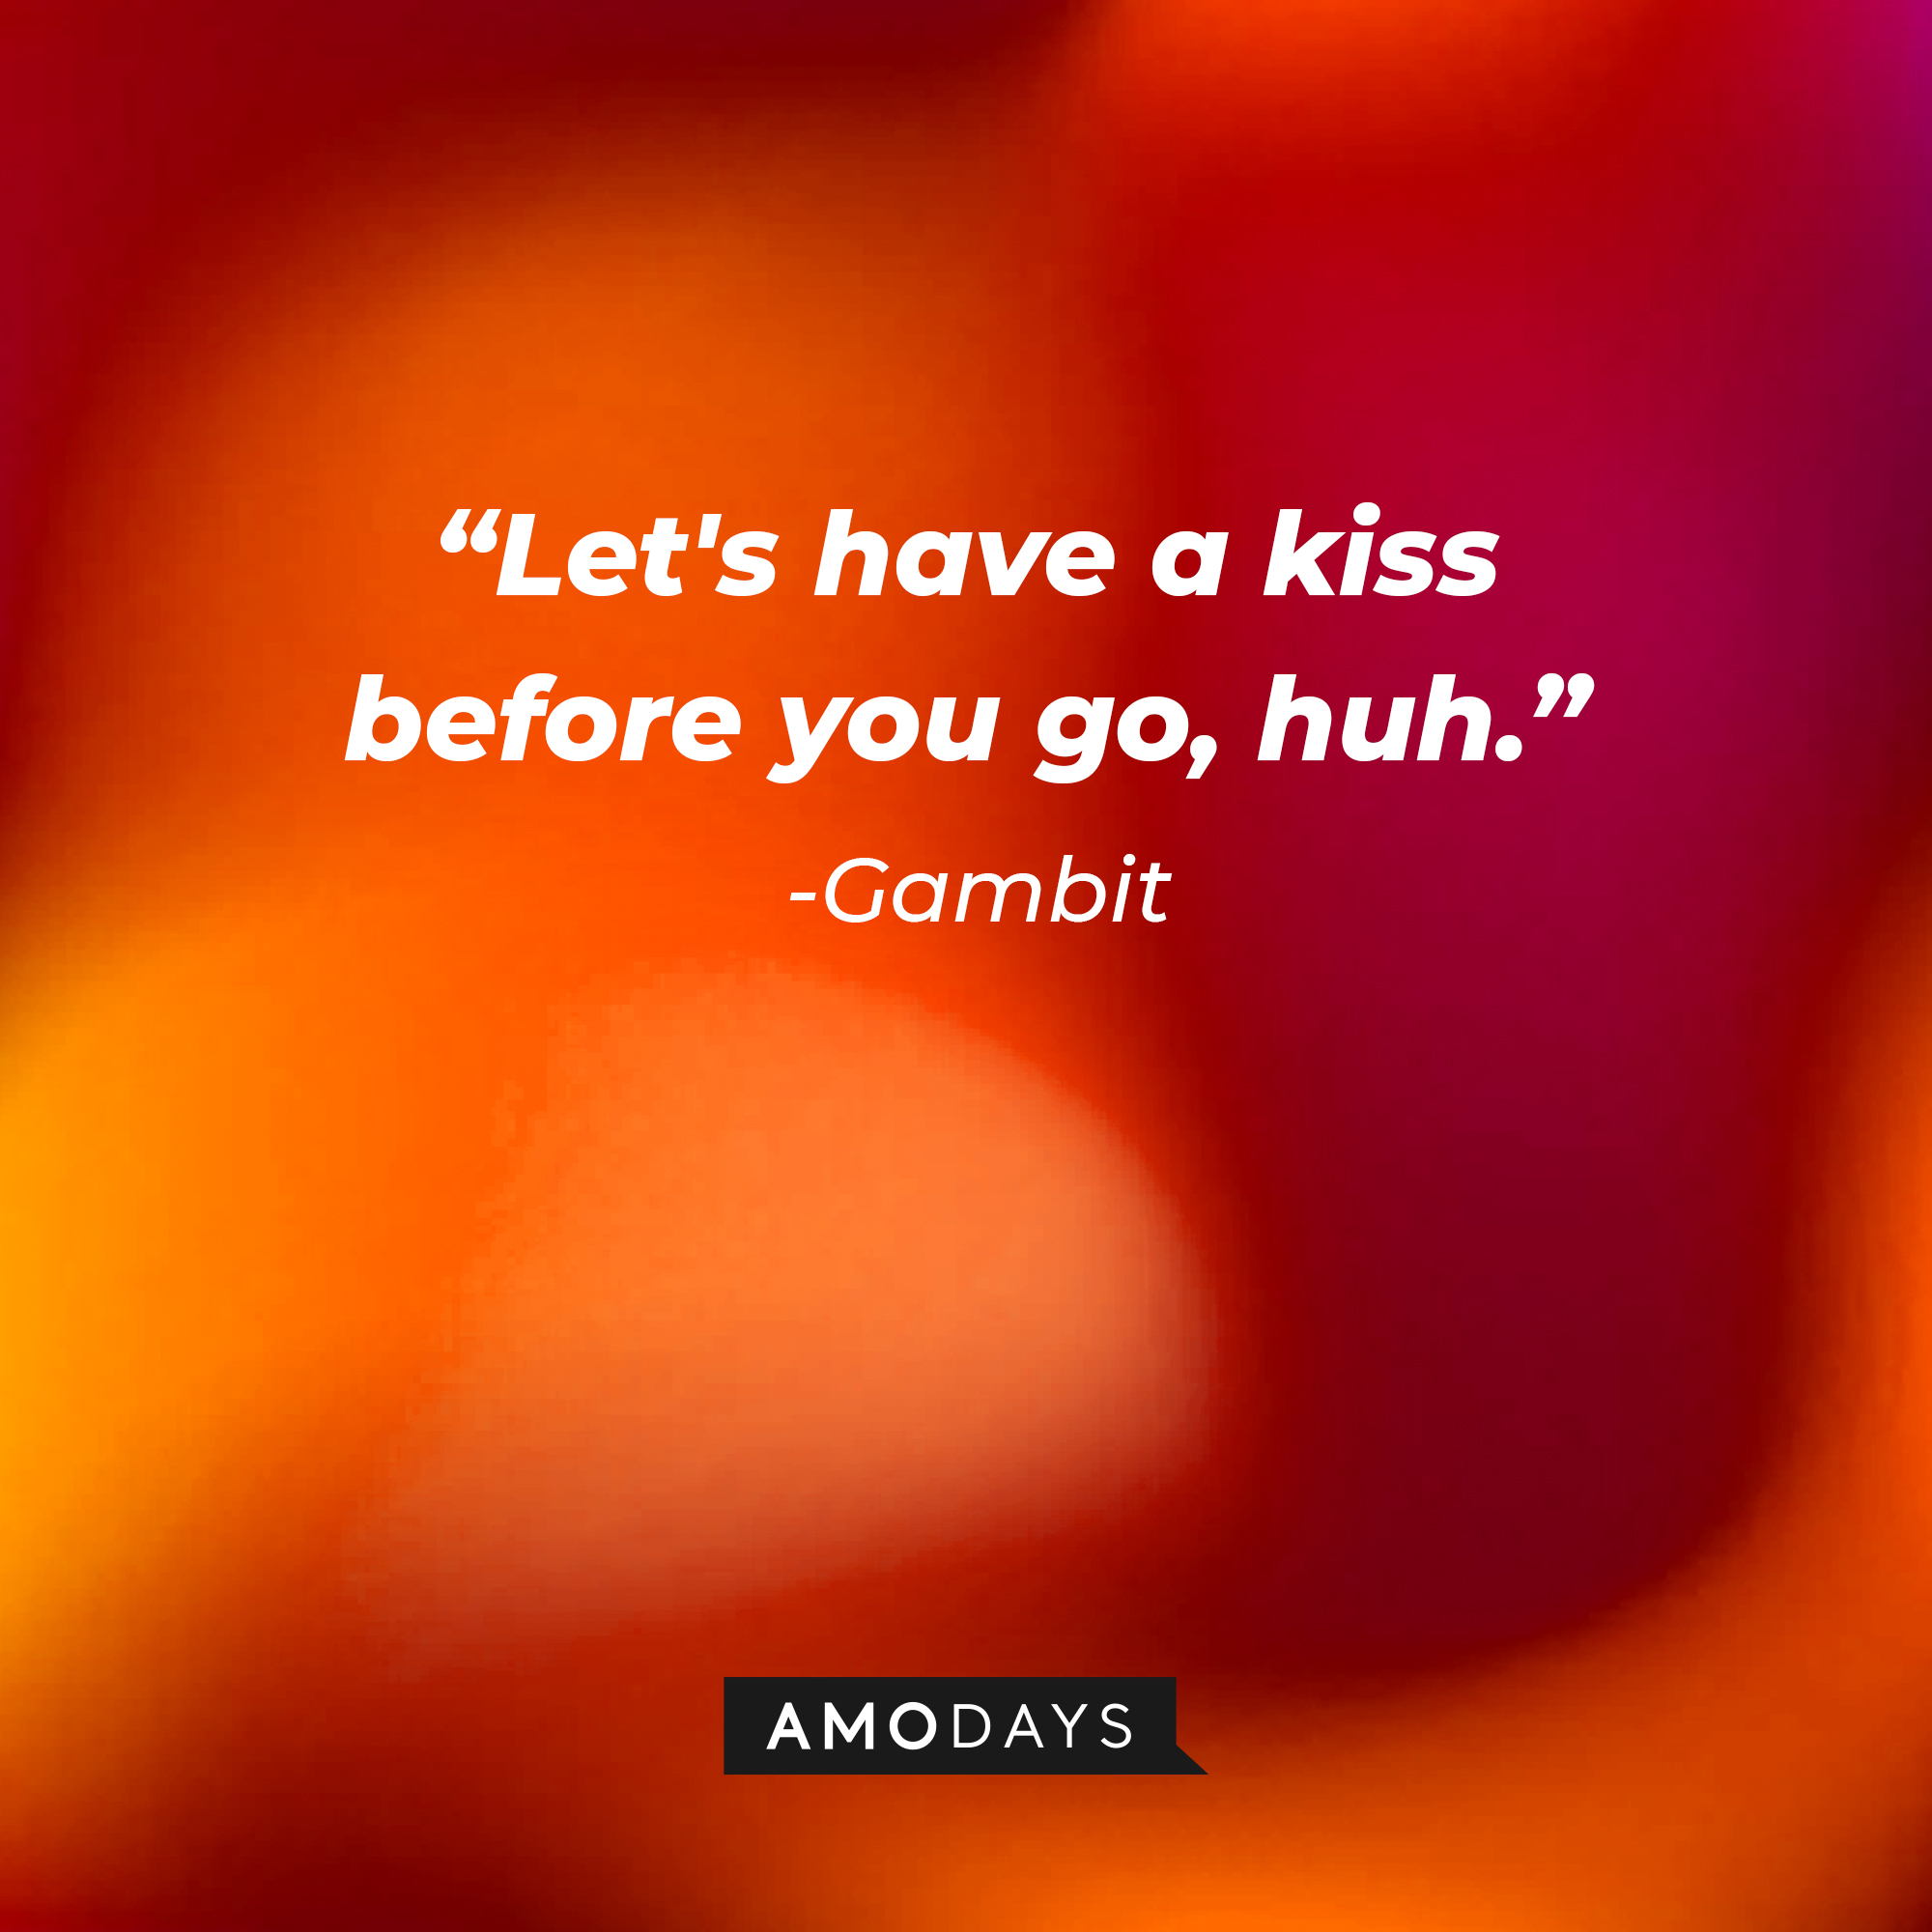 Gambit’s quote: “Let's have a kiss before you go, huh.” | Source: AmoDays